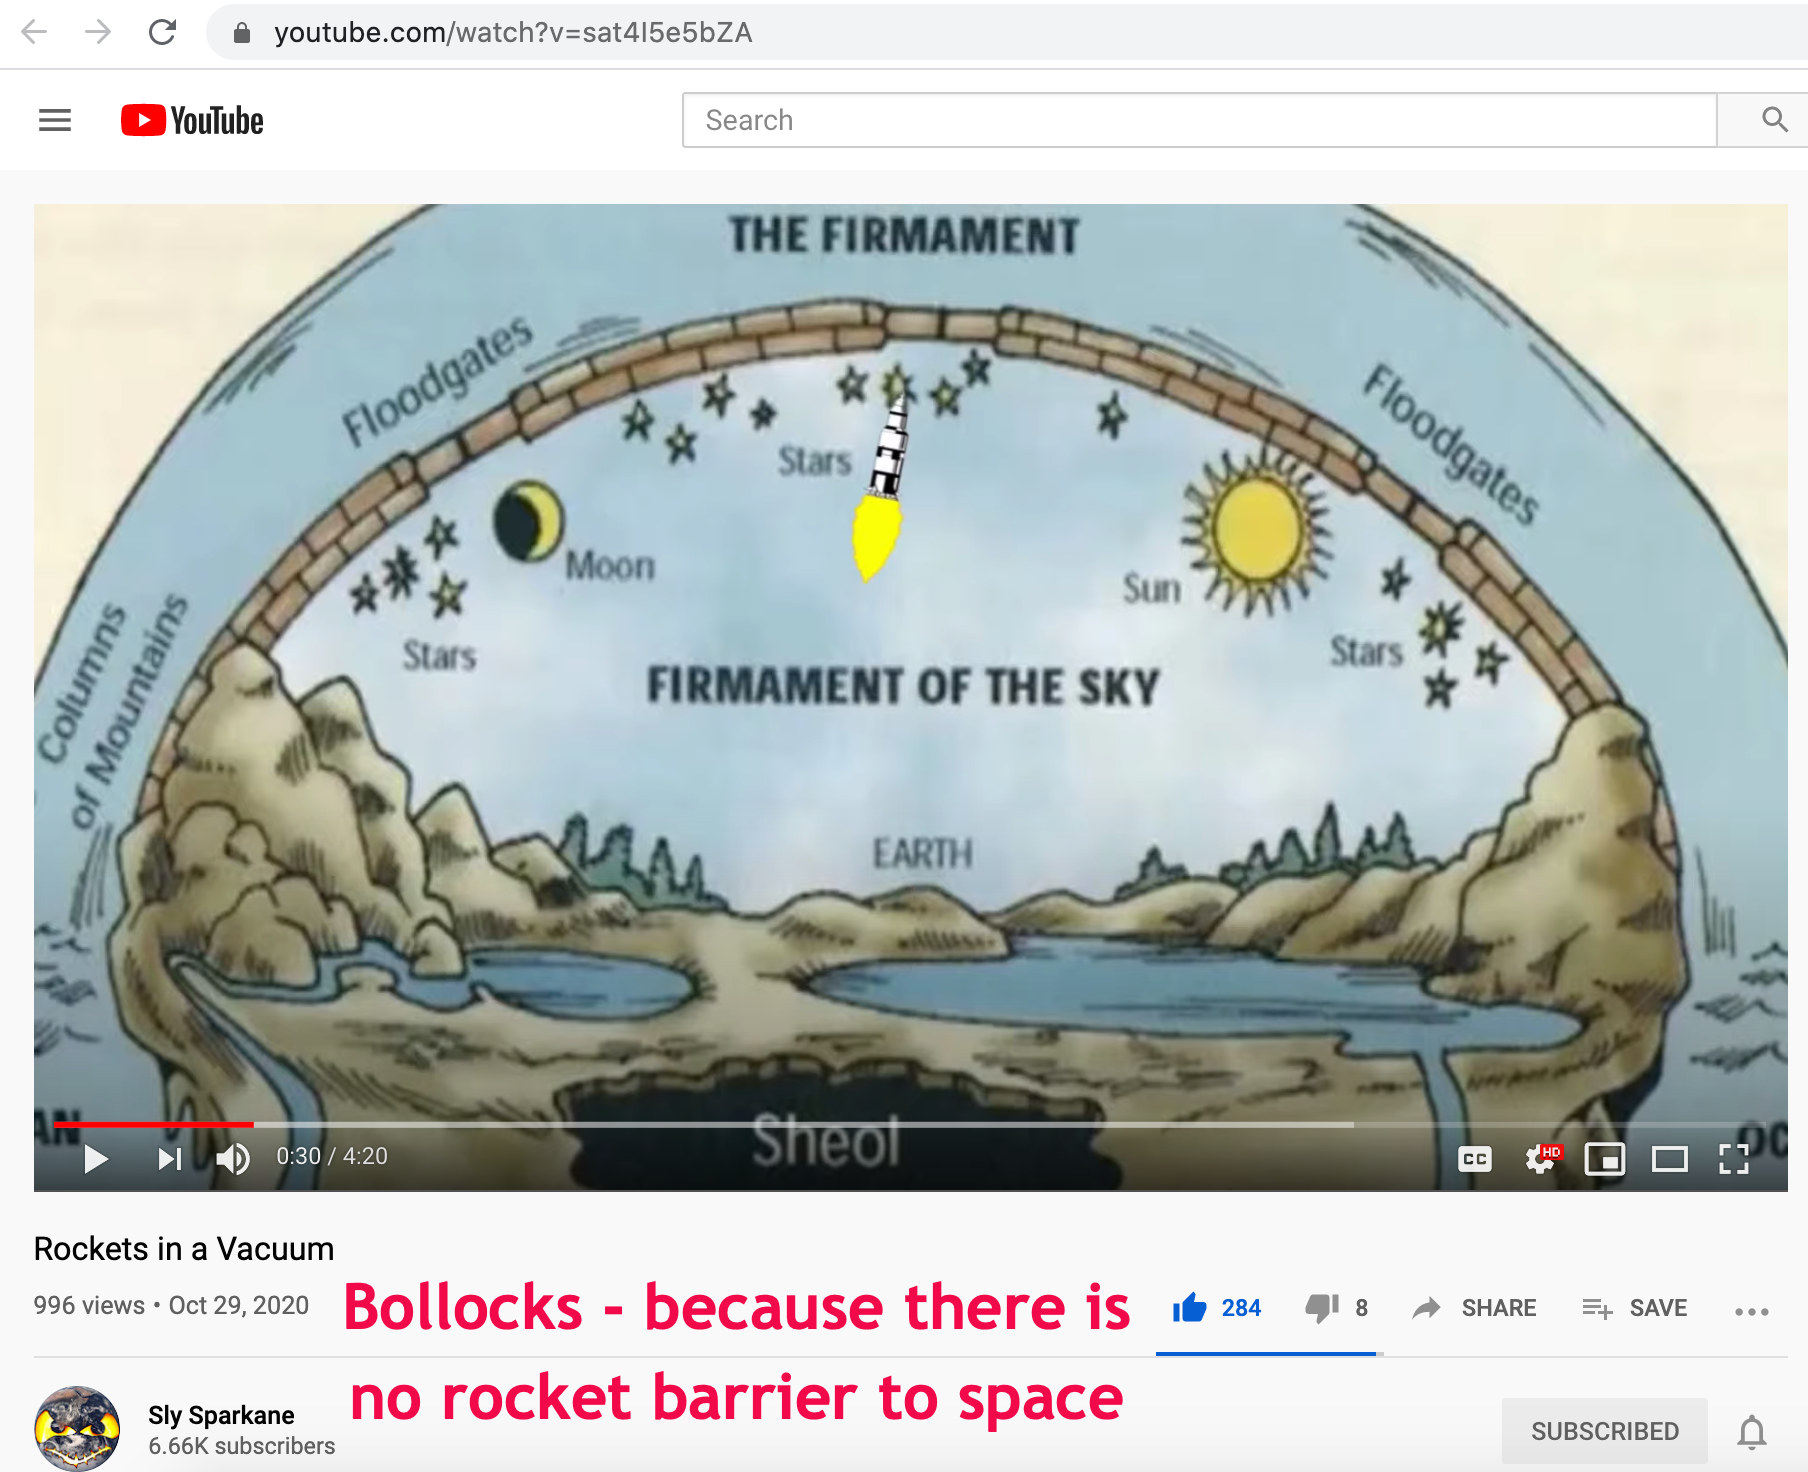 Bollocks - because there is no rocket barrier to space.jpg